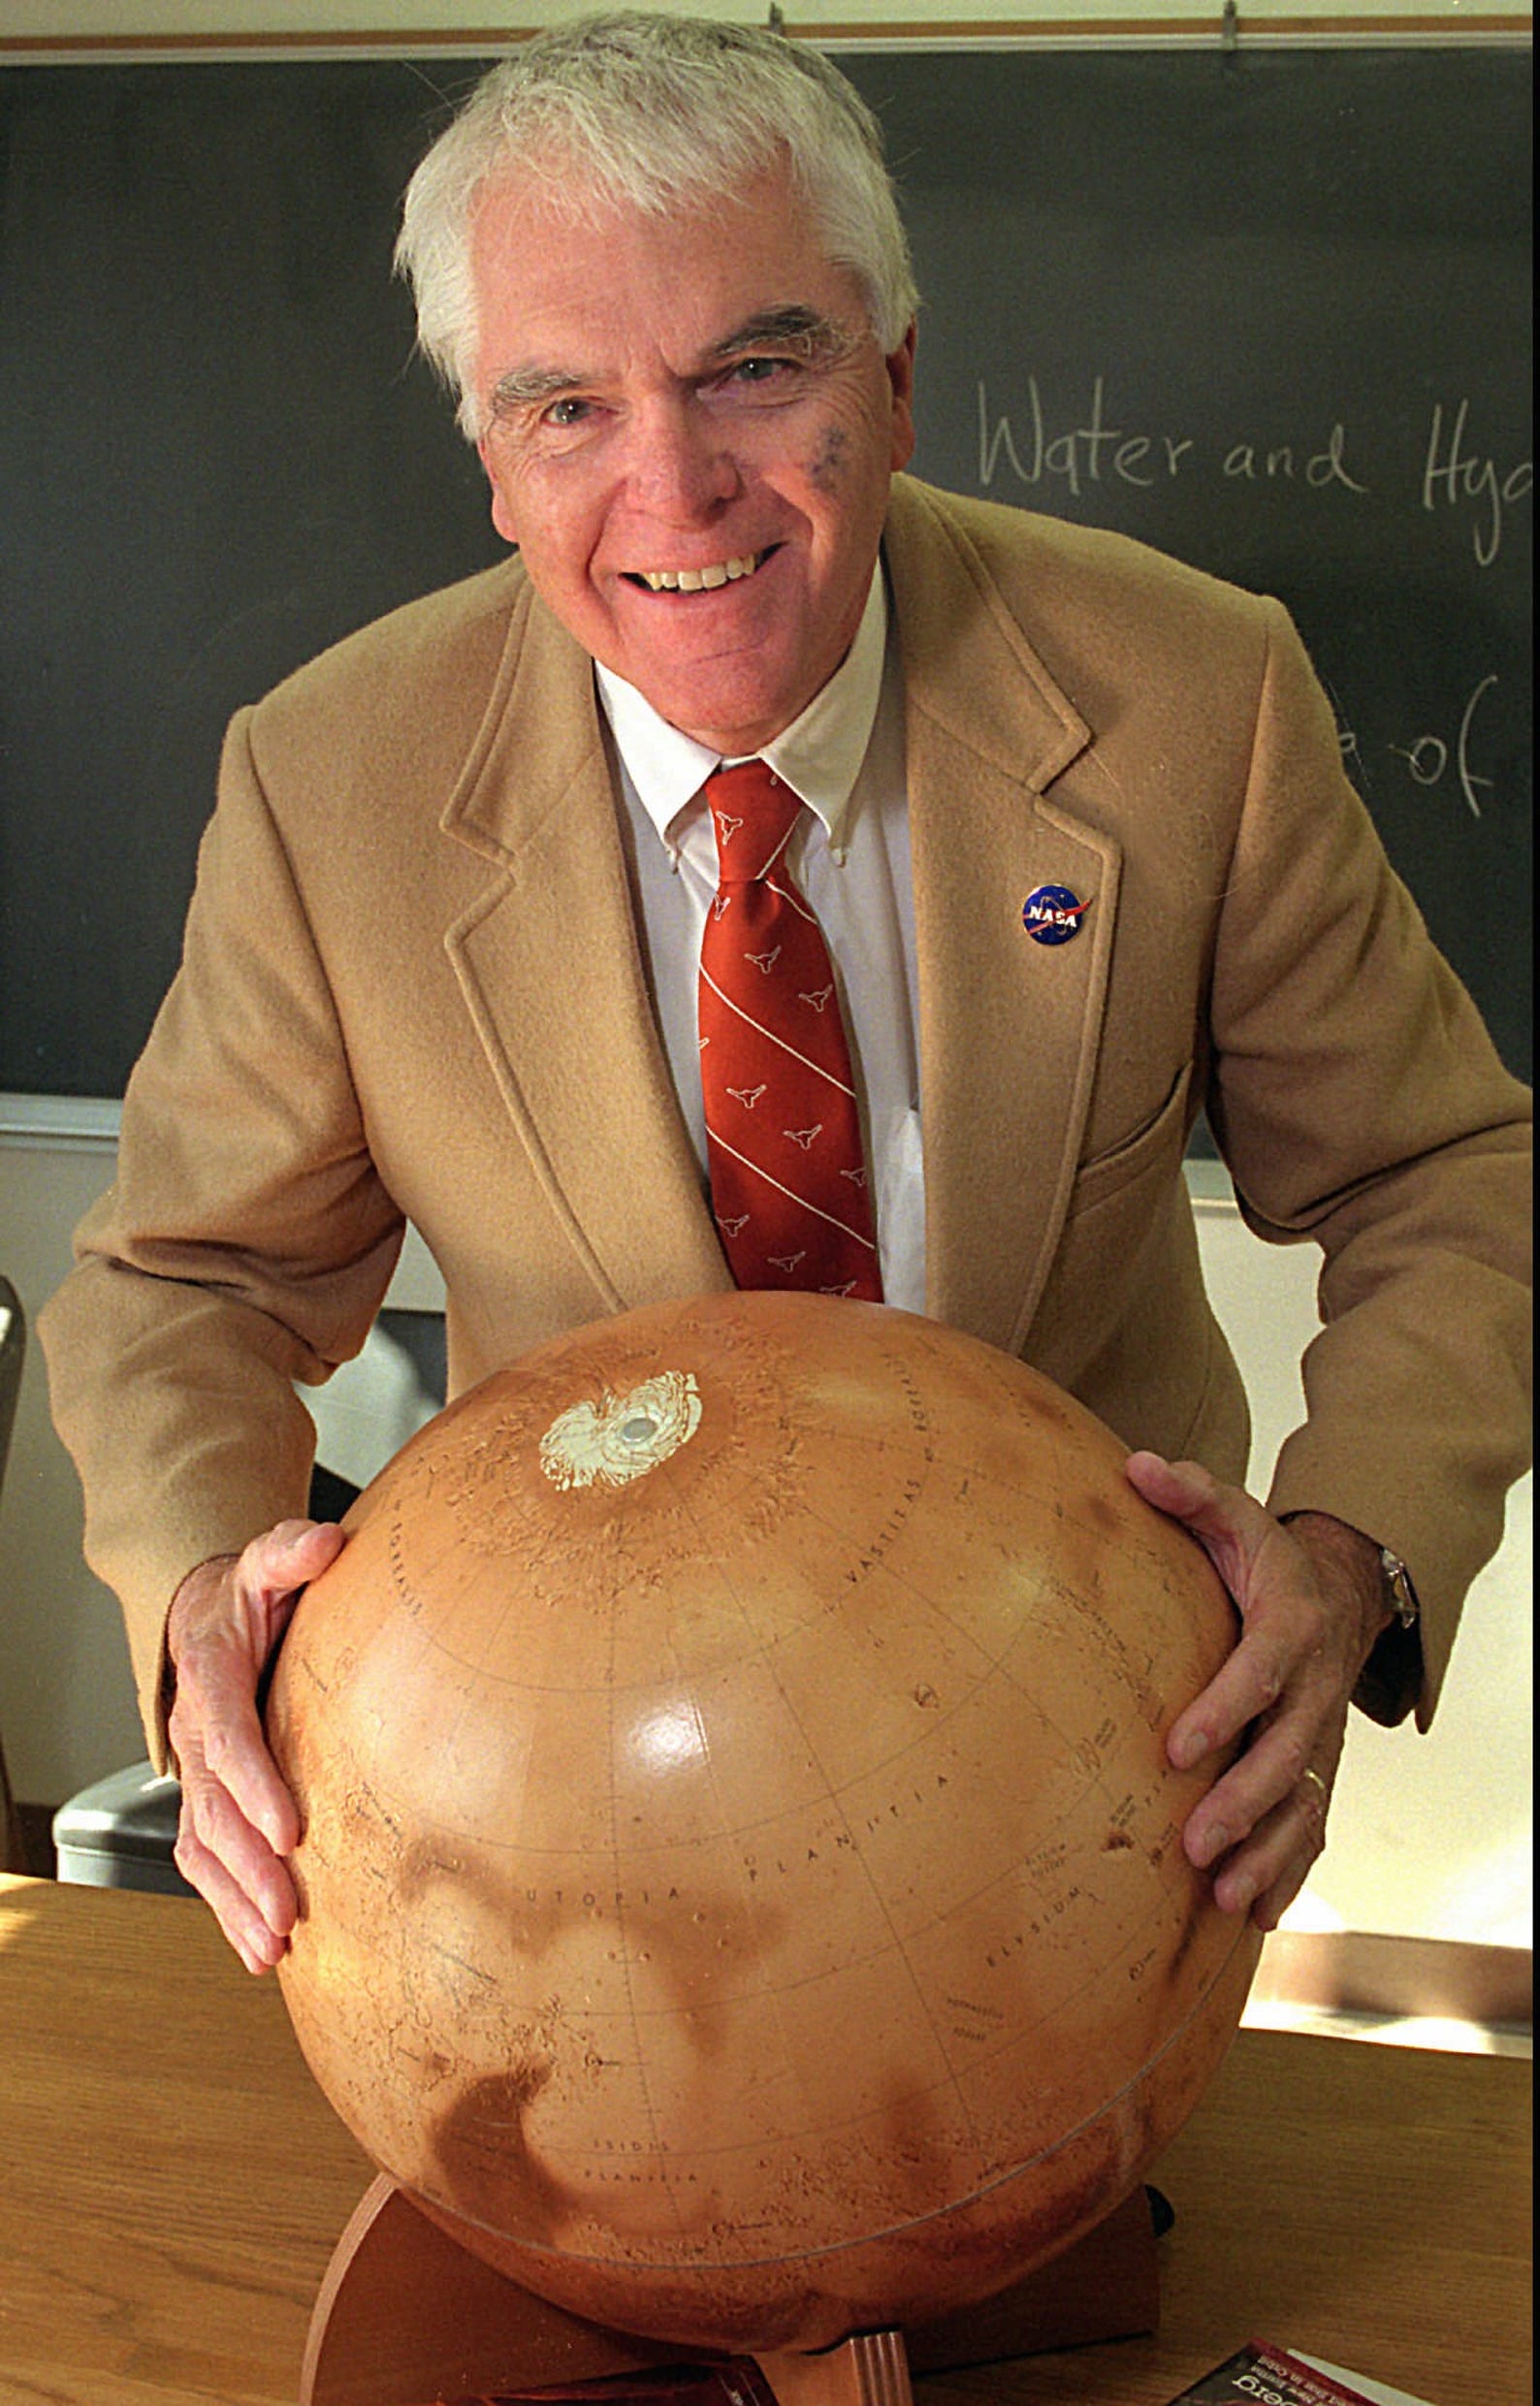 Hans Mark with replica of the planet Mars.